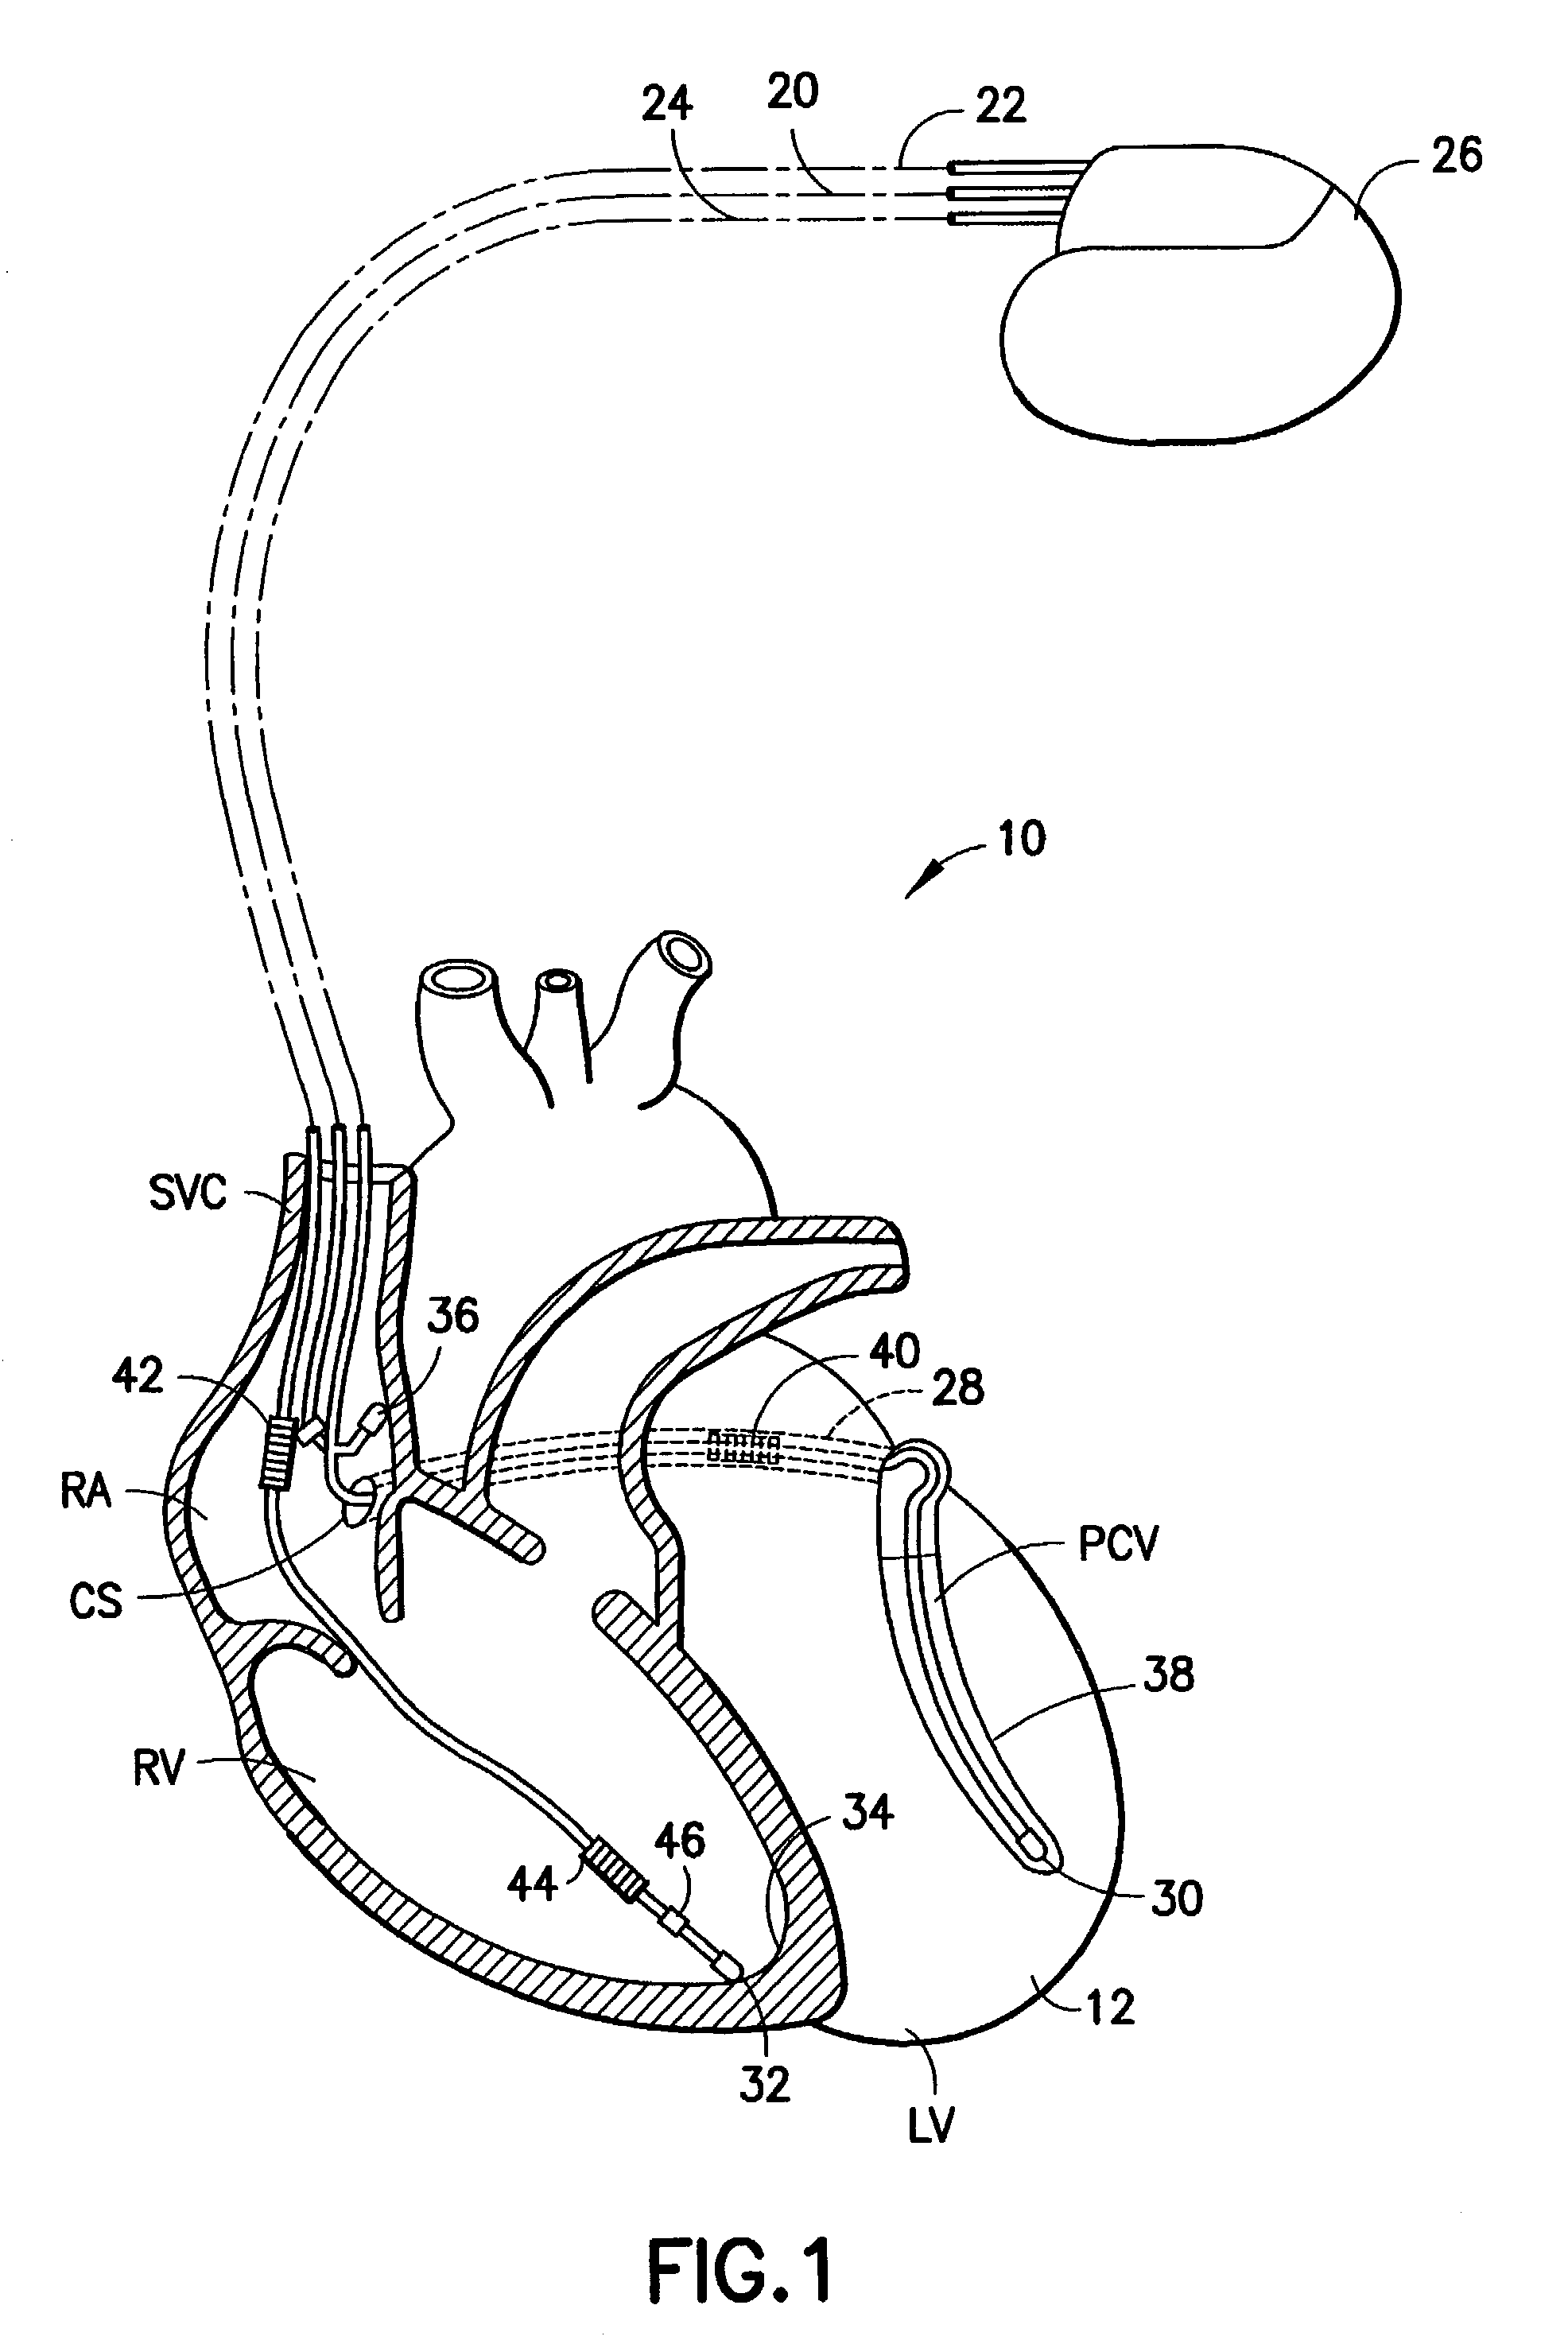 Stimulation/sensing electrodes for use with implantable cardiac leads in coronary vein locations